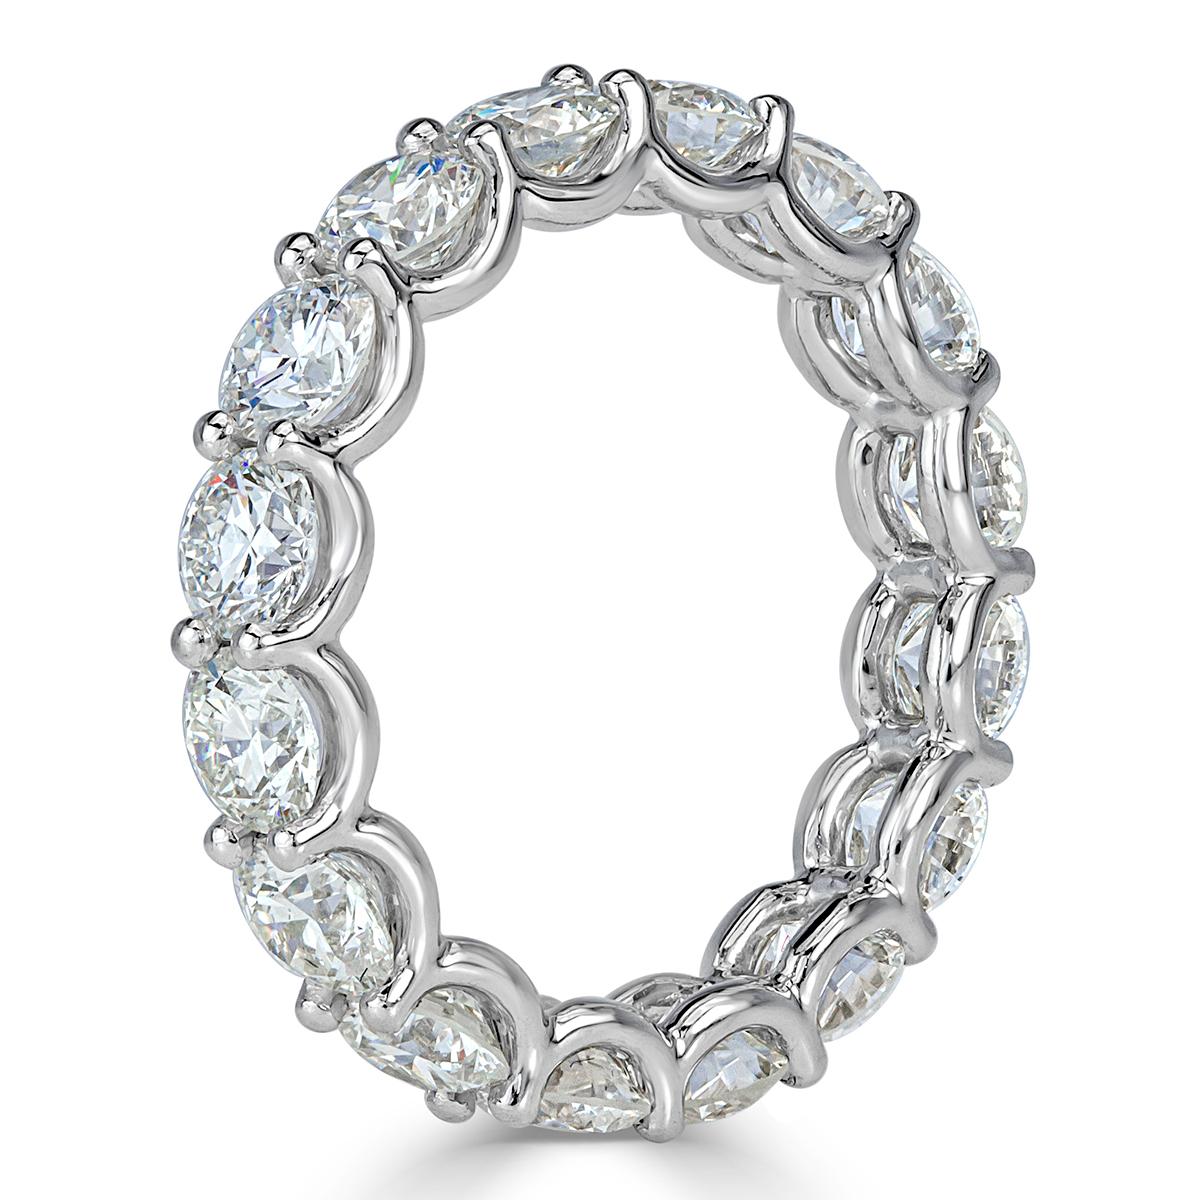 Absolutely stunning from every angles, this gorgeous round brilliant cut diamond eternity band showcases 4.00ct of perfectly matched round brilliant cut diamonds graded at E-F, VS1-VS2. The diamonds are each hand selected and set in a sturdy 18k